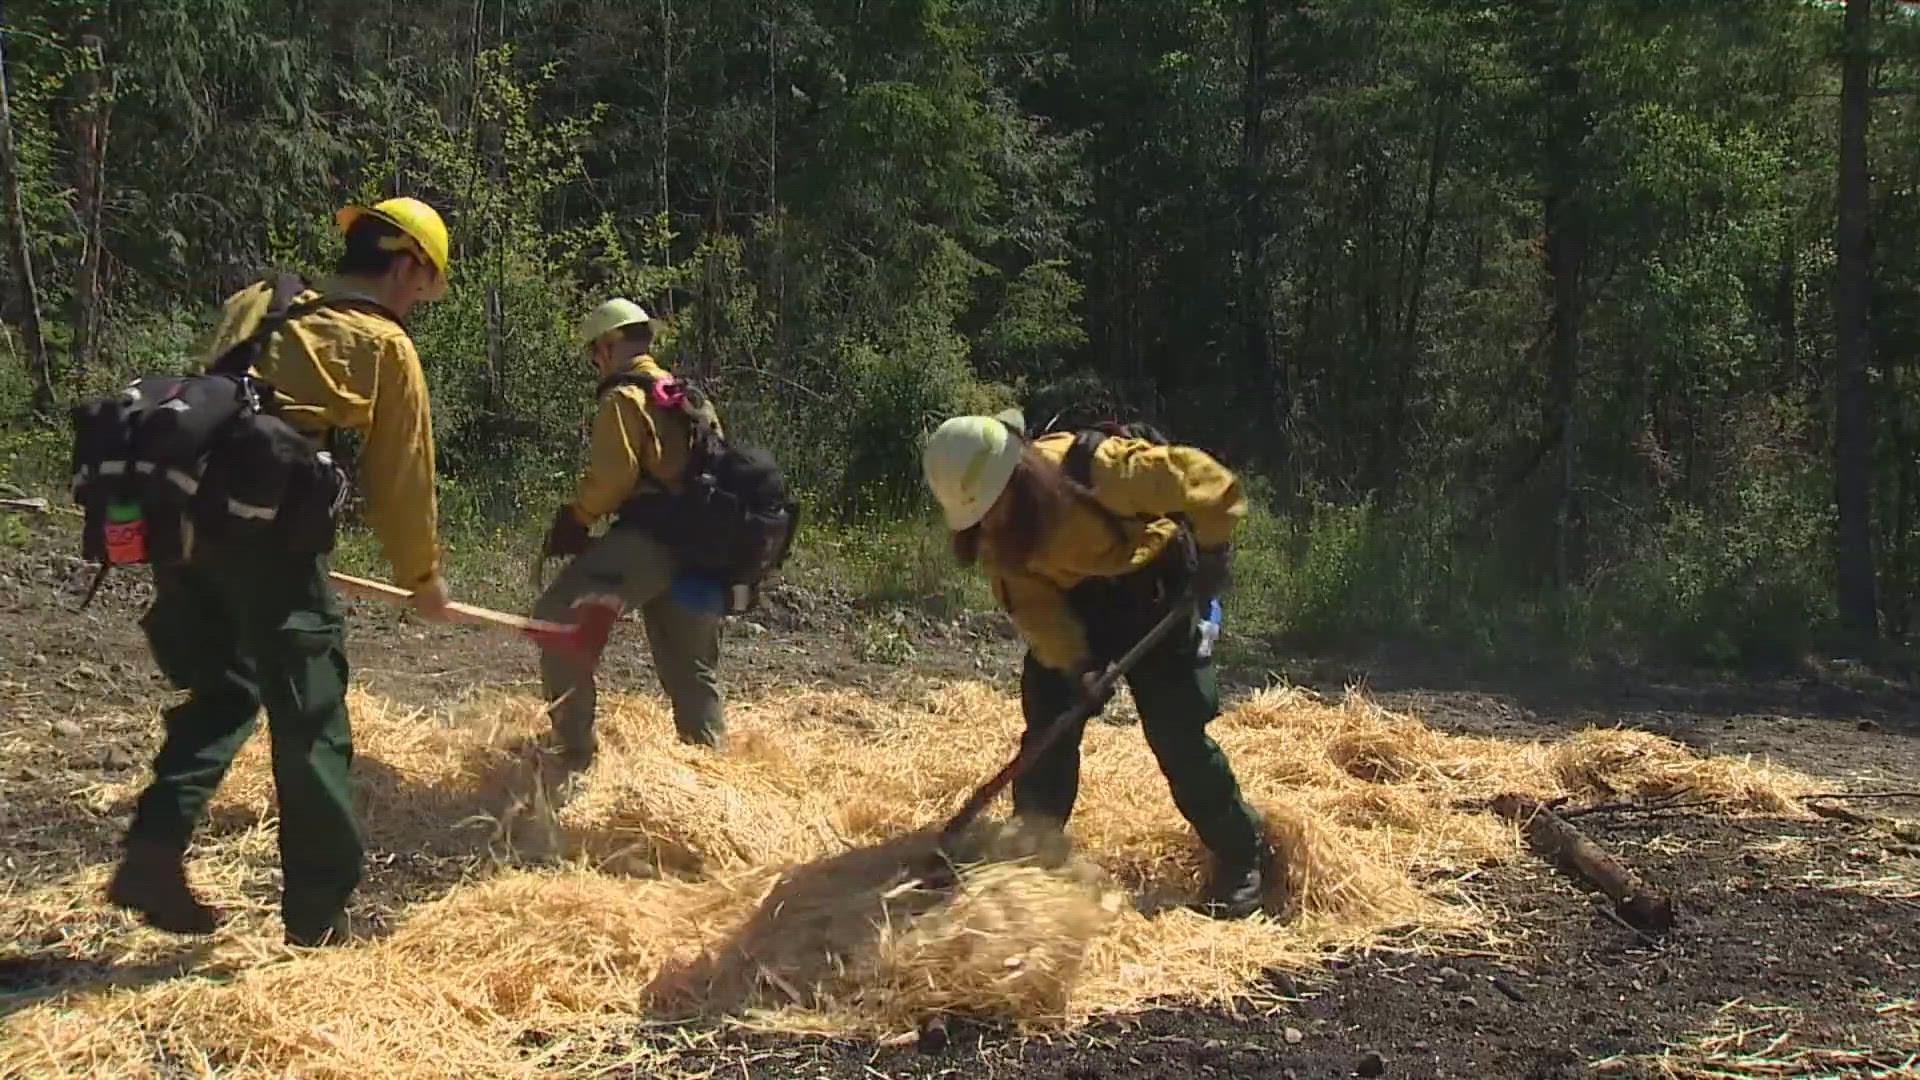 This is the first year spring training is being held at the North Bend Fire Academy site. Students camp for 10 days and undergo extensive hands-on training.